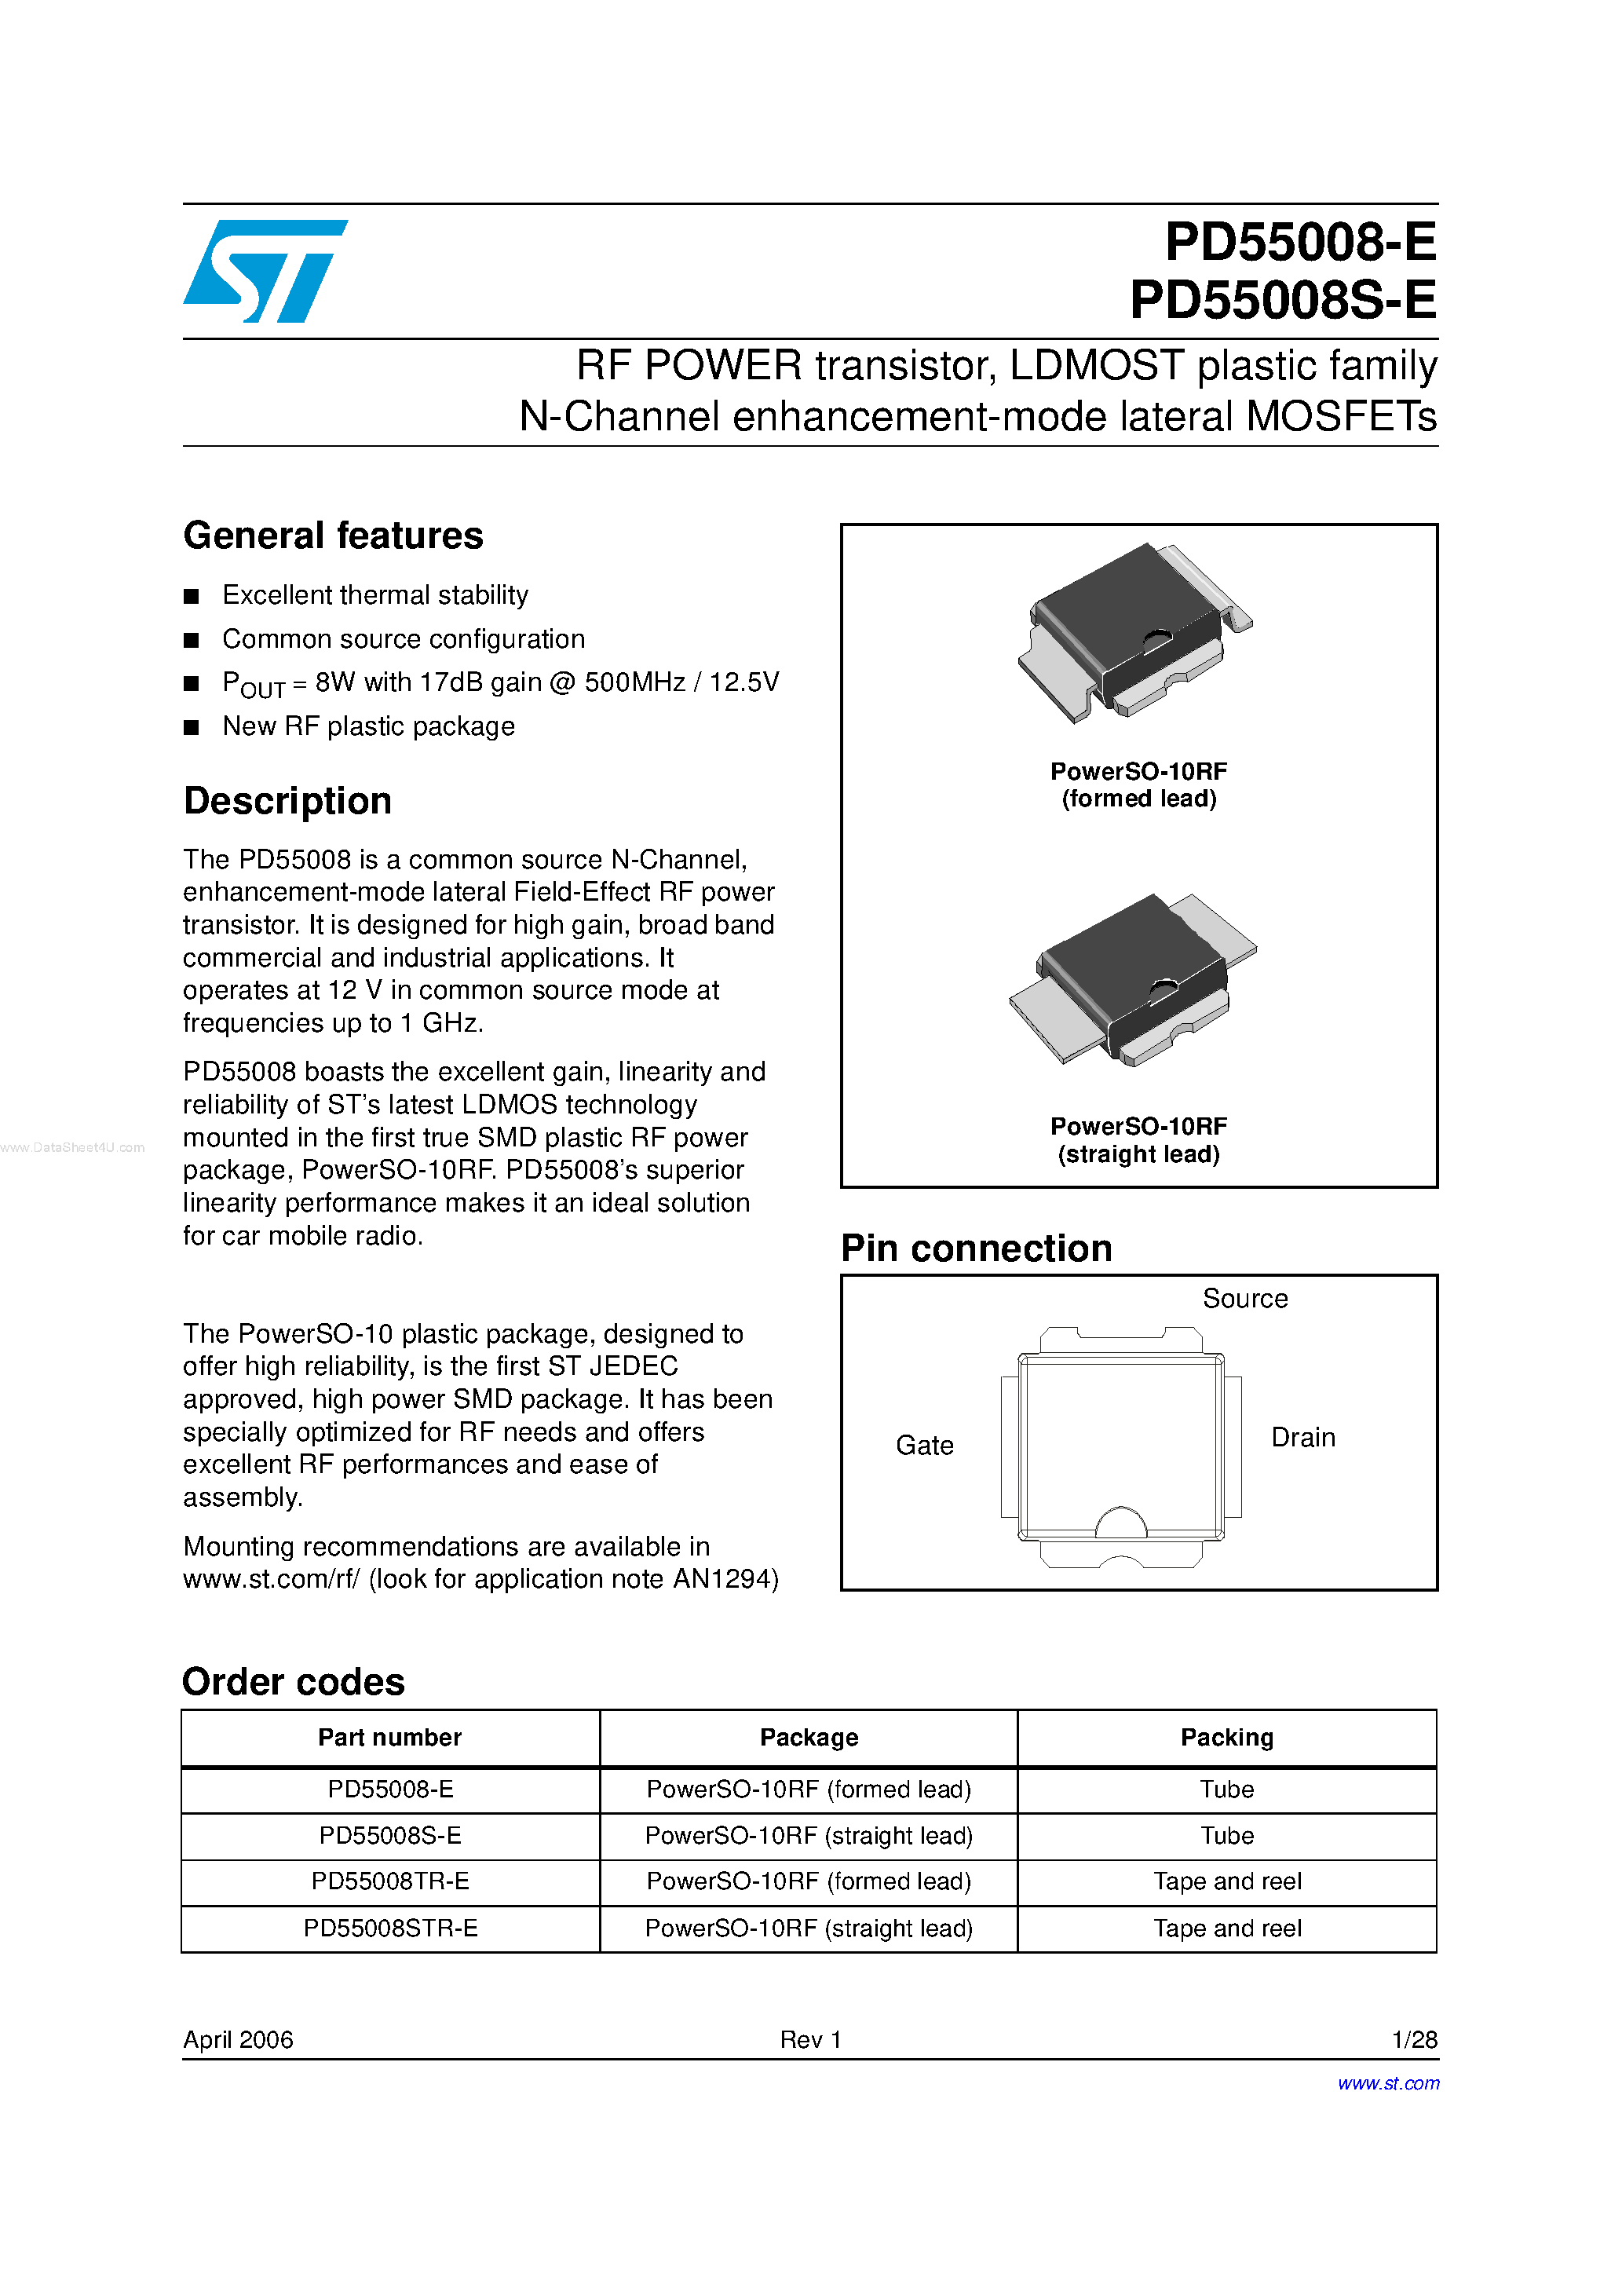 Datasheet PD55008-E - RF POWER transistor / LDMOST plastic family N-Channel enhancement-mode lateral MOSFETs page 1